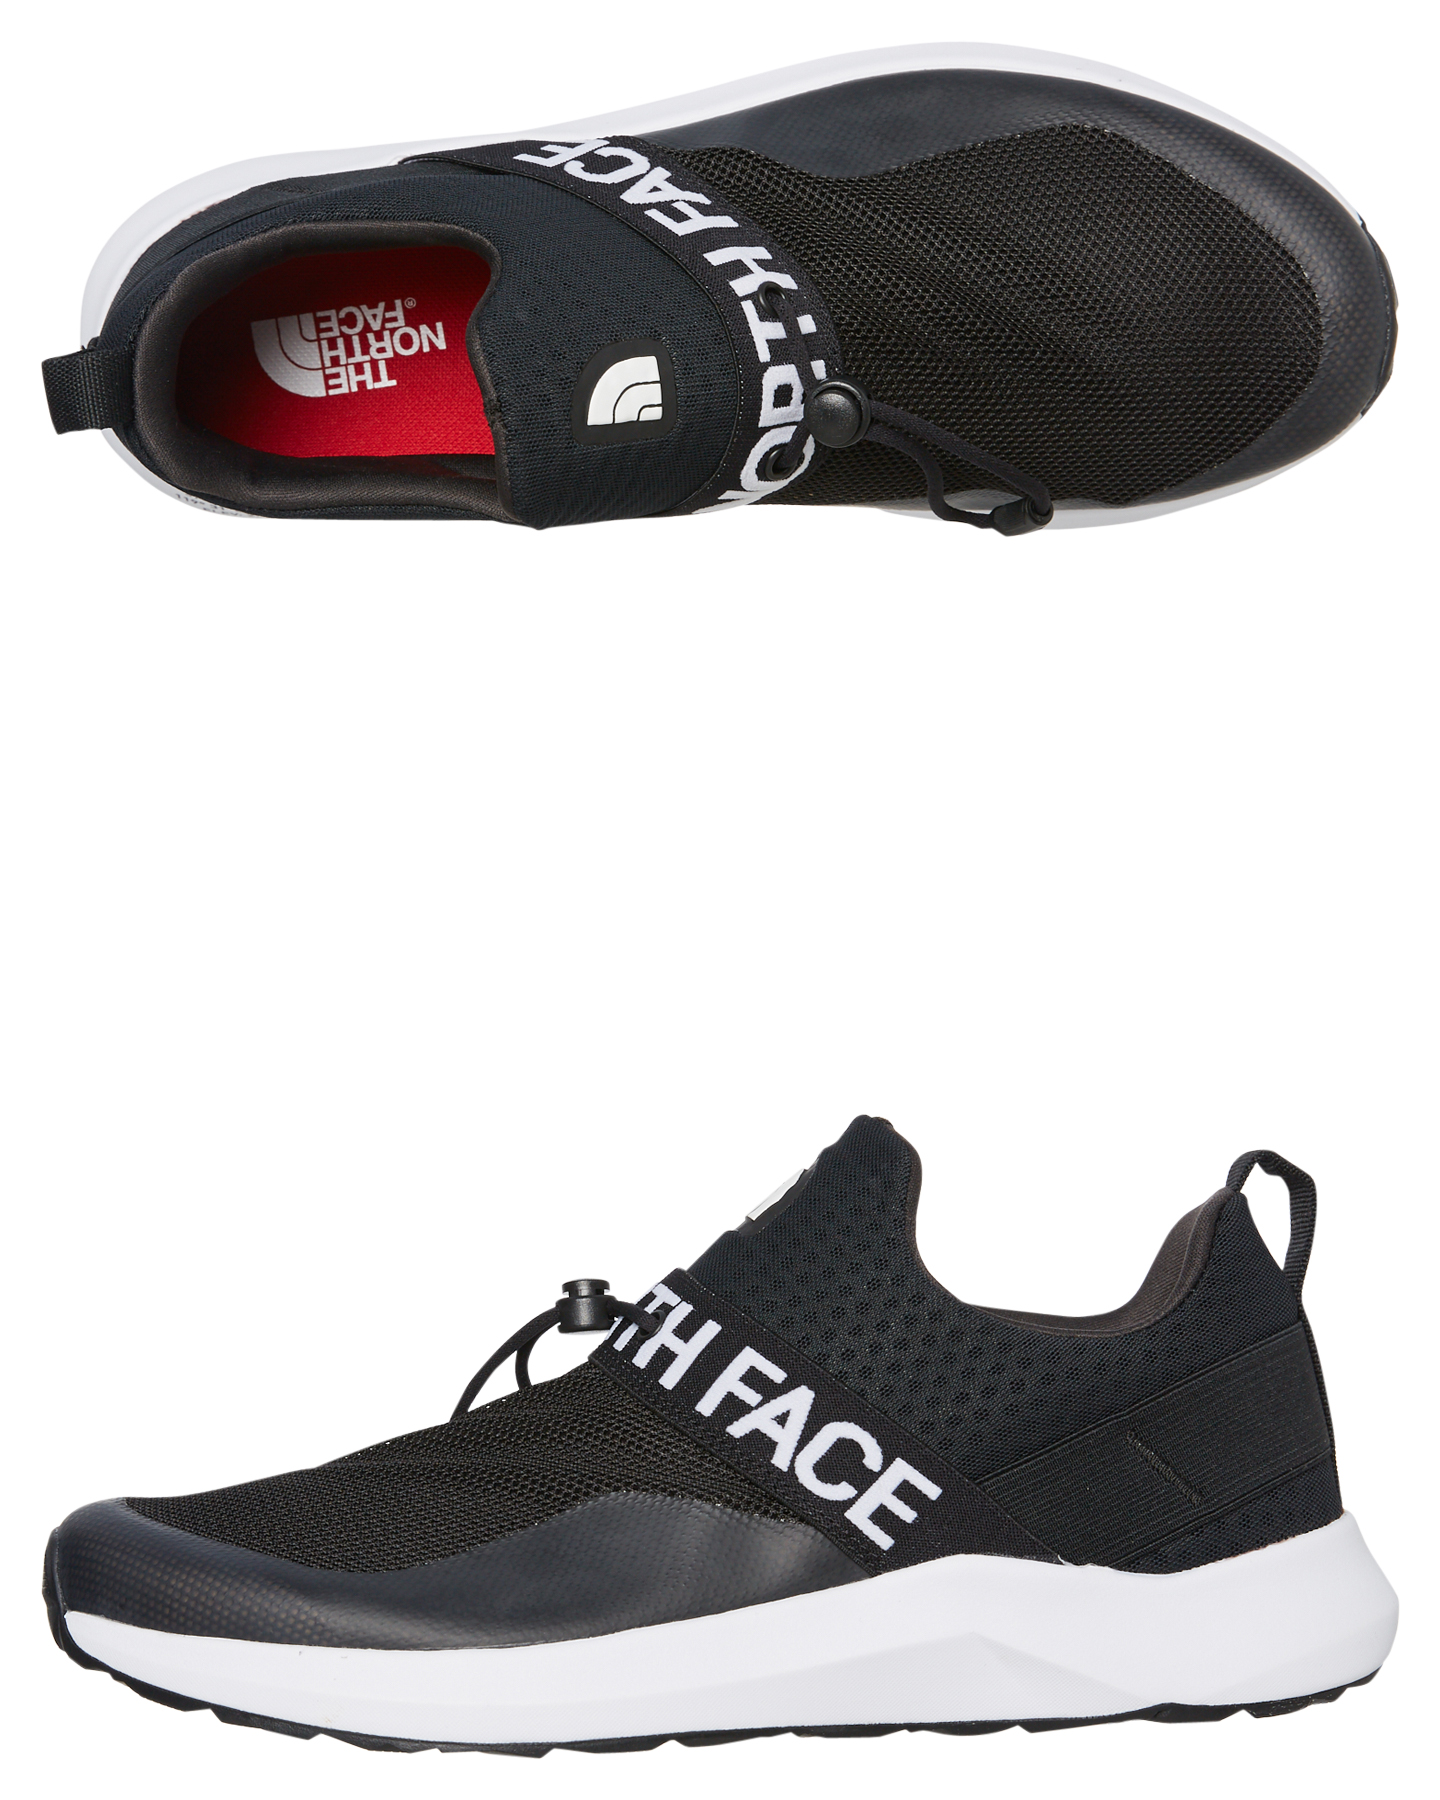 north face black shoes